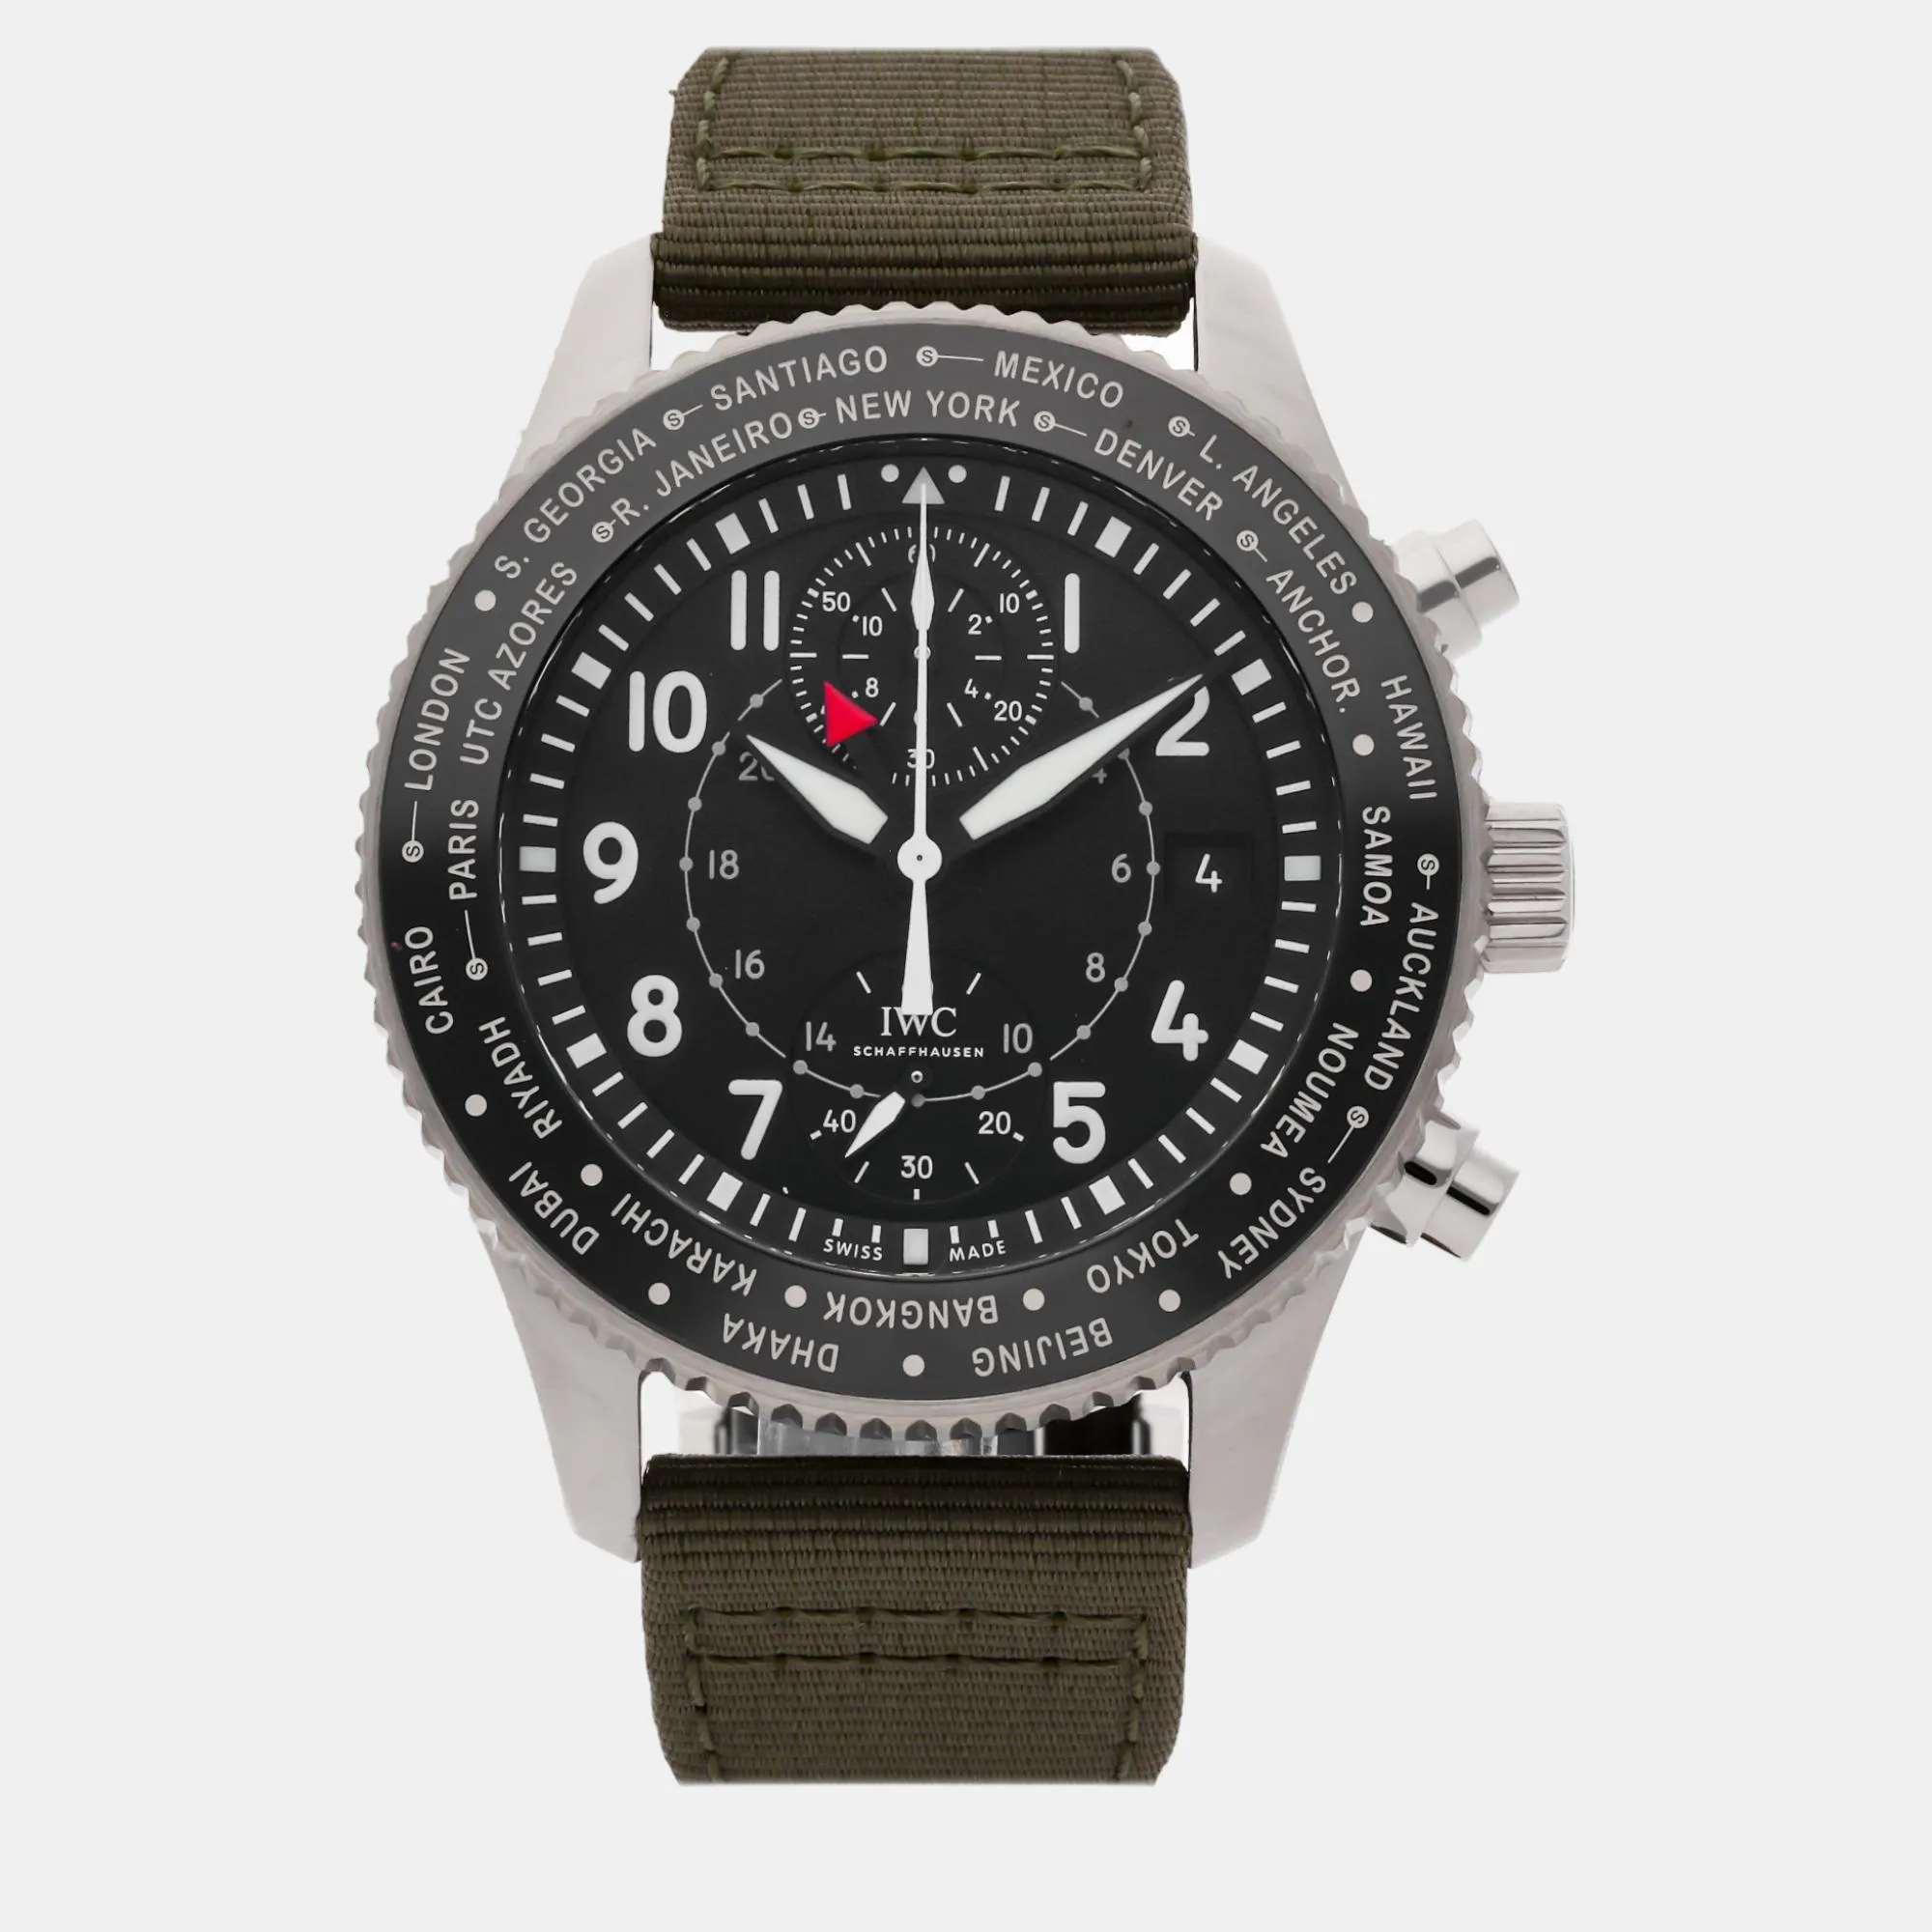 IWC Pilot IW395001 46mm Stainless steel